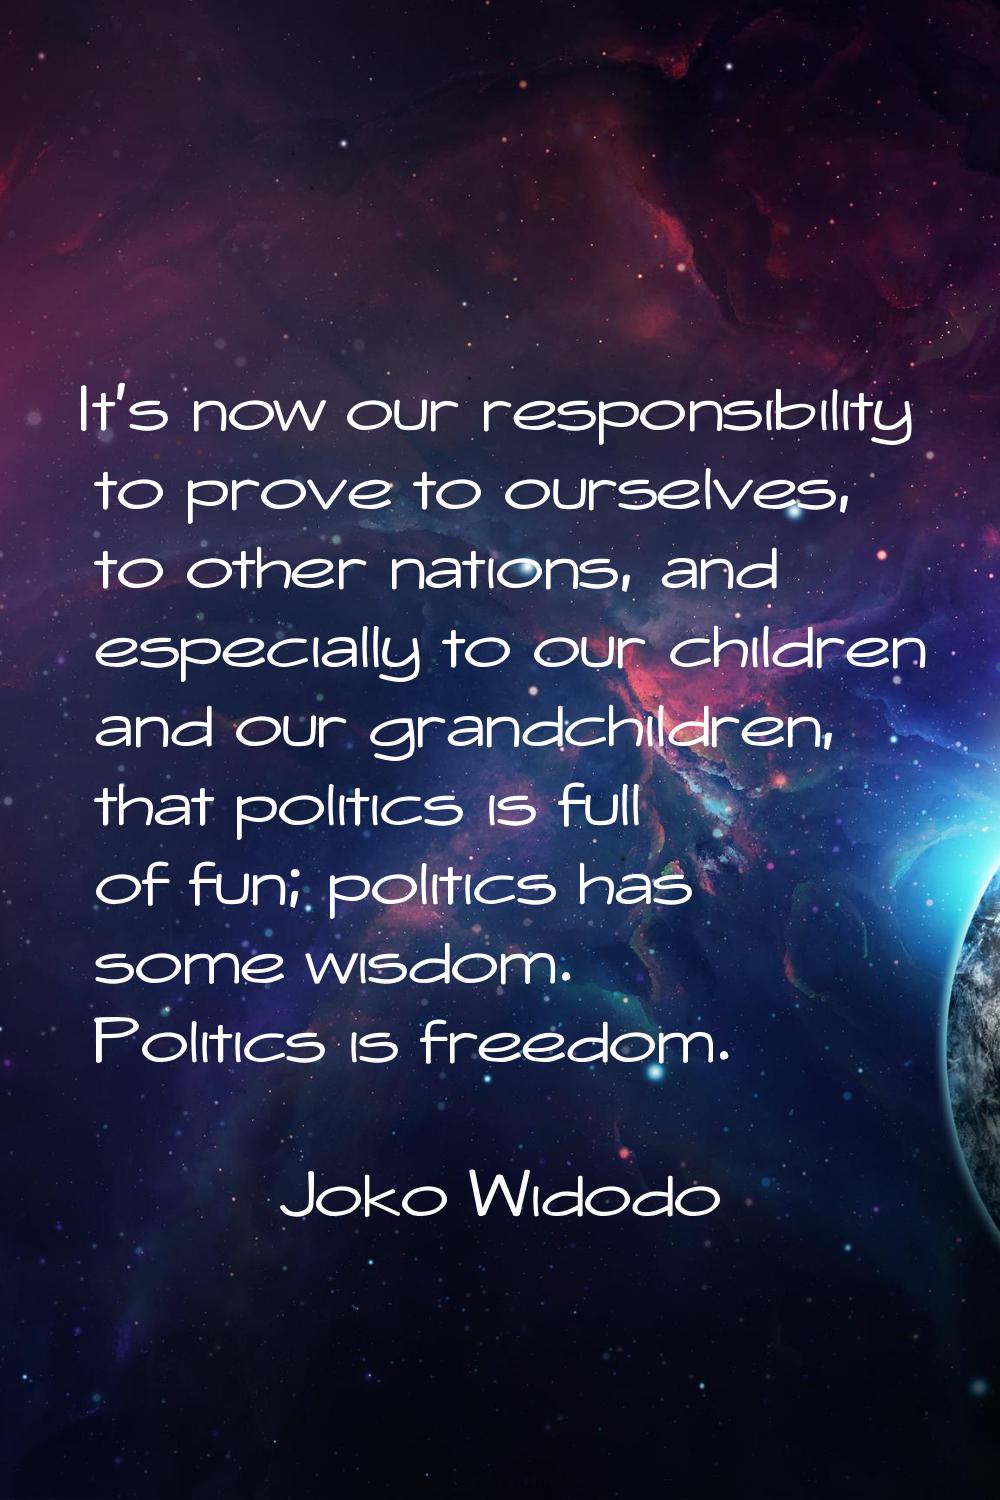 It's now our responsibility to prove to ourselves, to other nations, and especially to our children